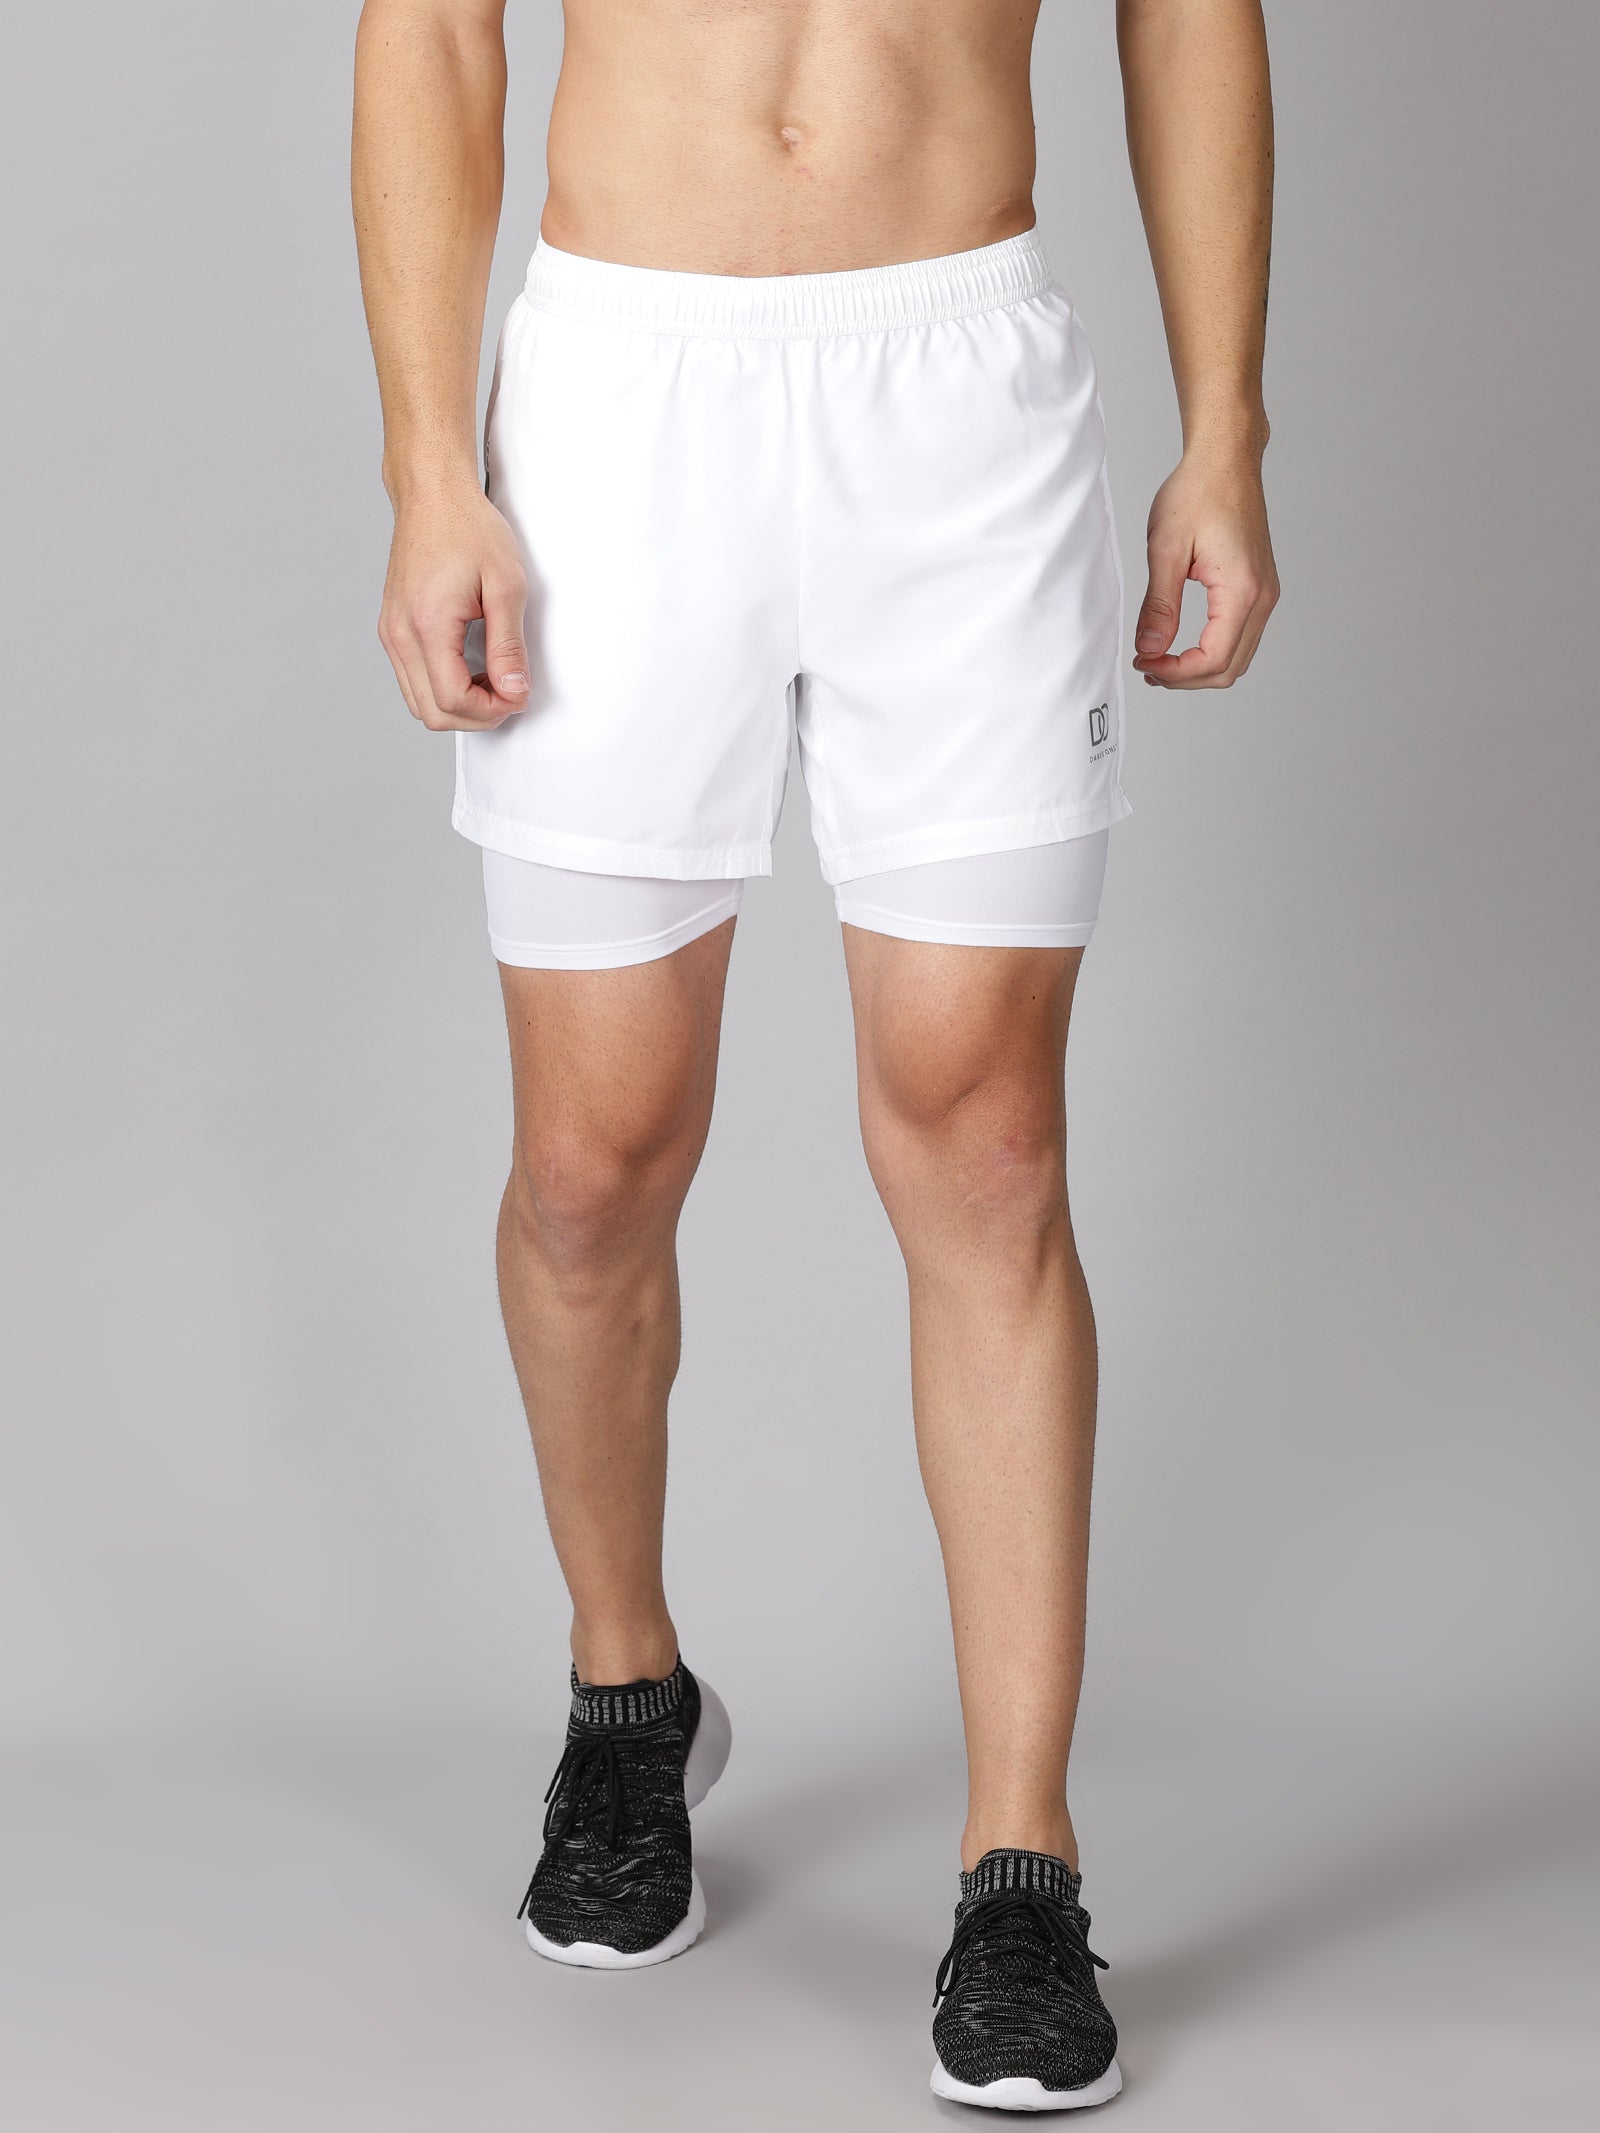 Dares Only Solid White Hybrid Run Shorts